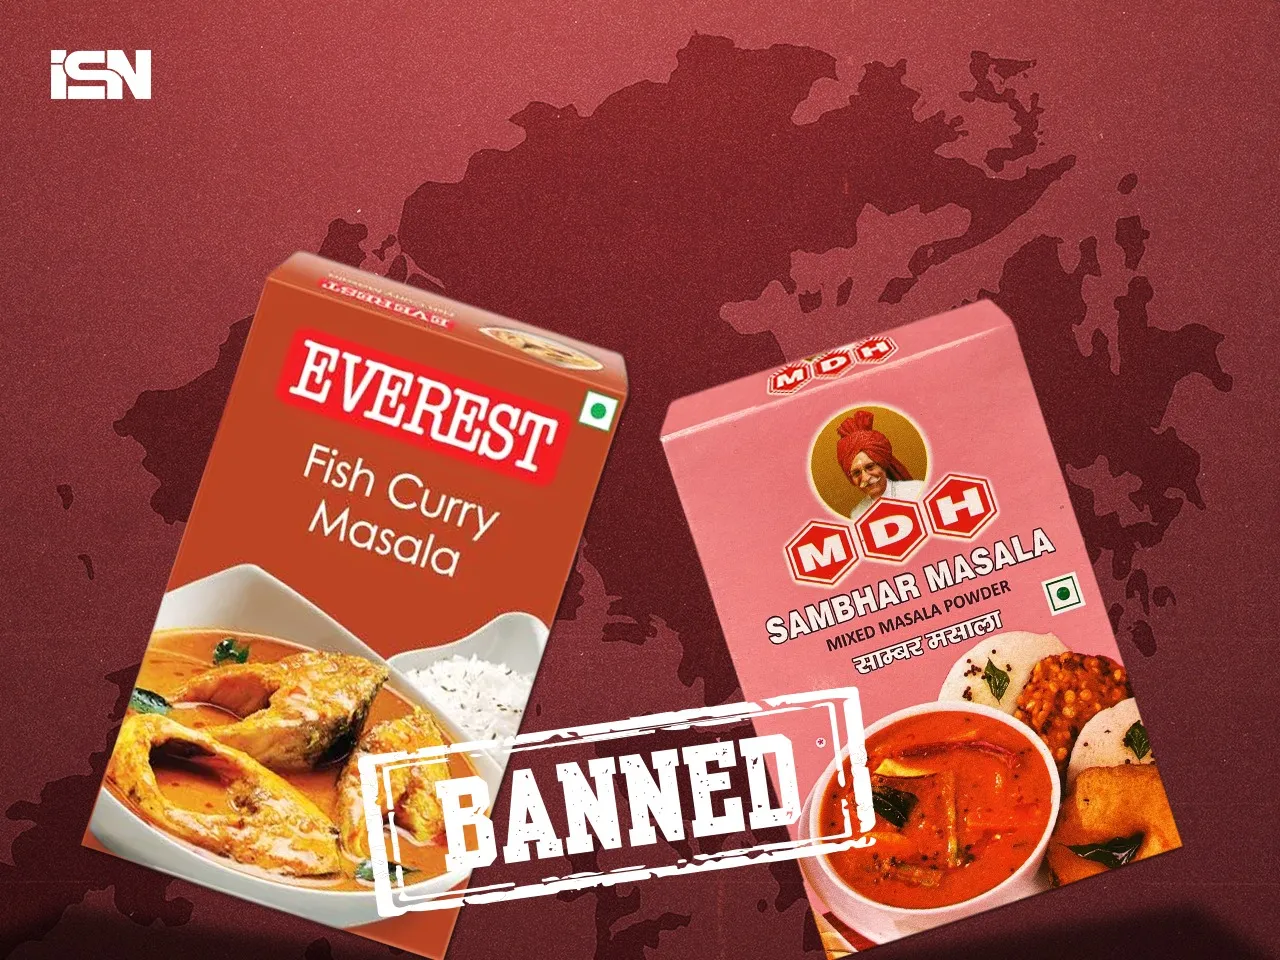 After Singapore, Hong Kong bans India's Everest, MDH spices; Here's the single reason